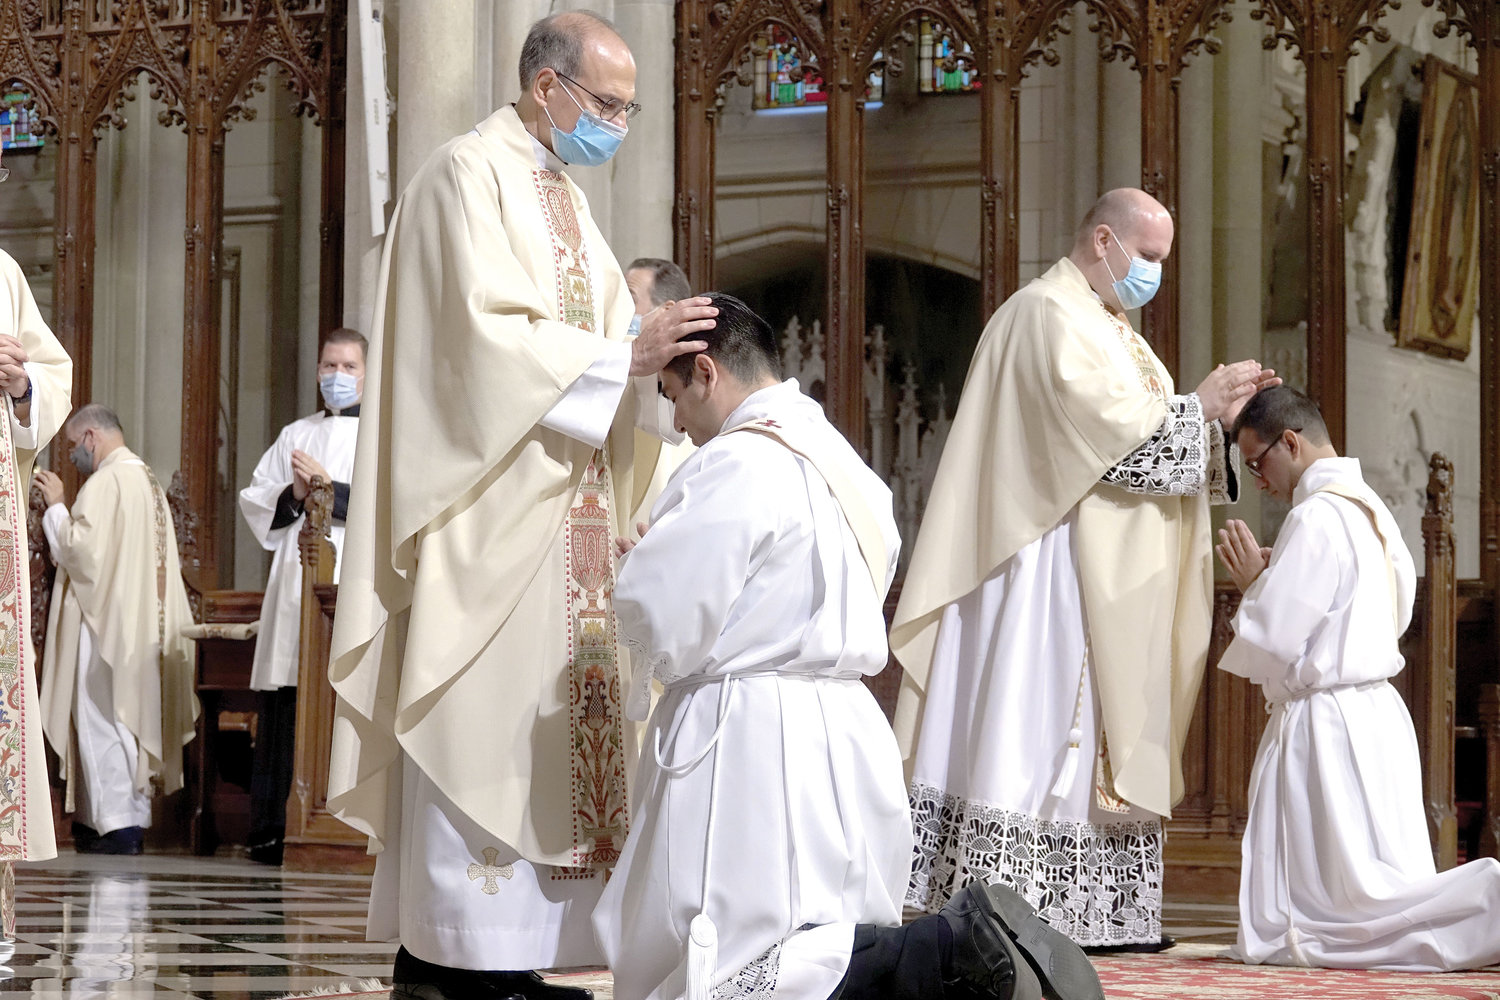 Priests lay hands on priesthood candidates Luis Silva Cervantes and Roland Pereira, M.Id., during the June 26 Ordination Mass at St. Patrick’s Cathedral.